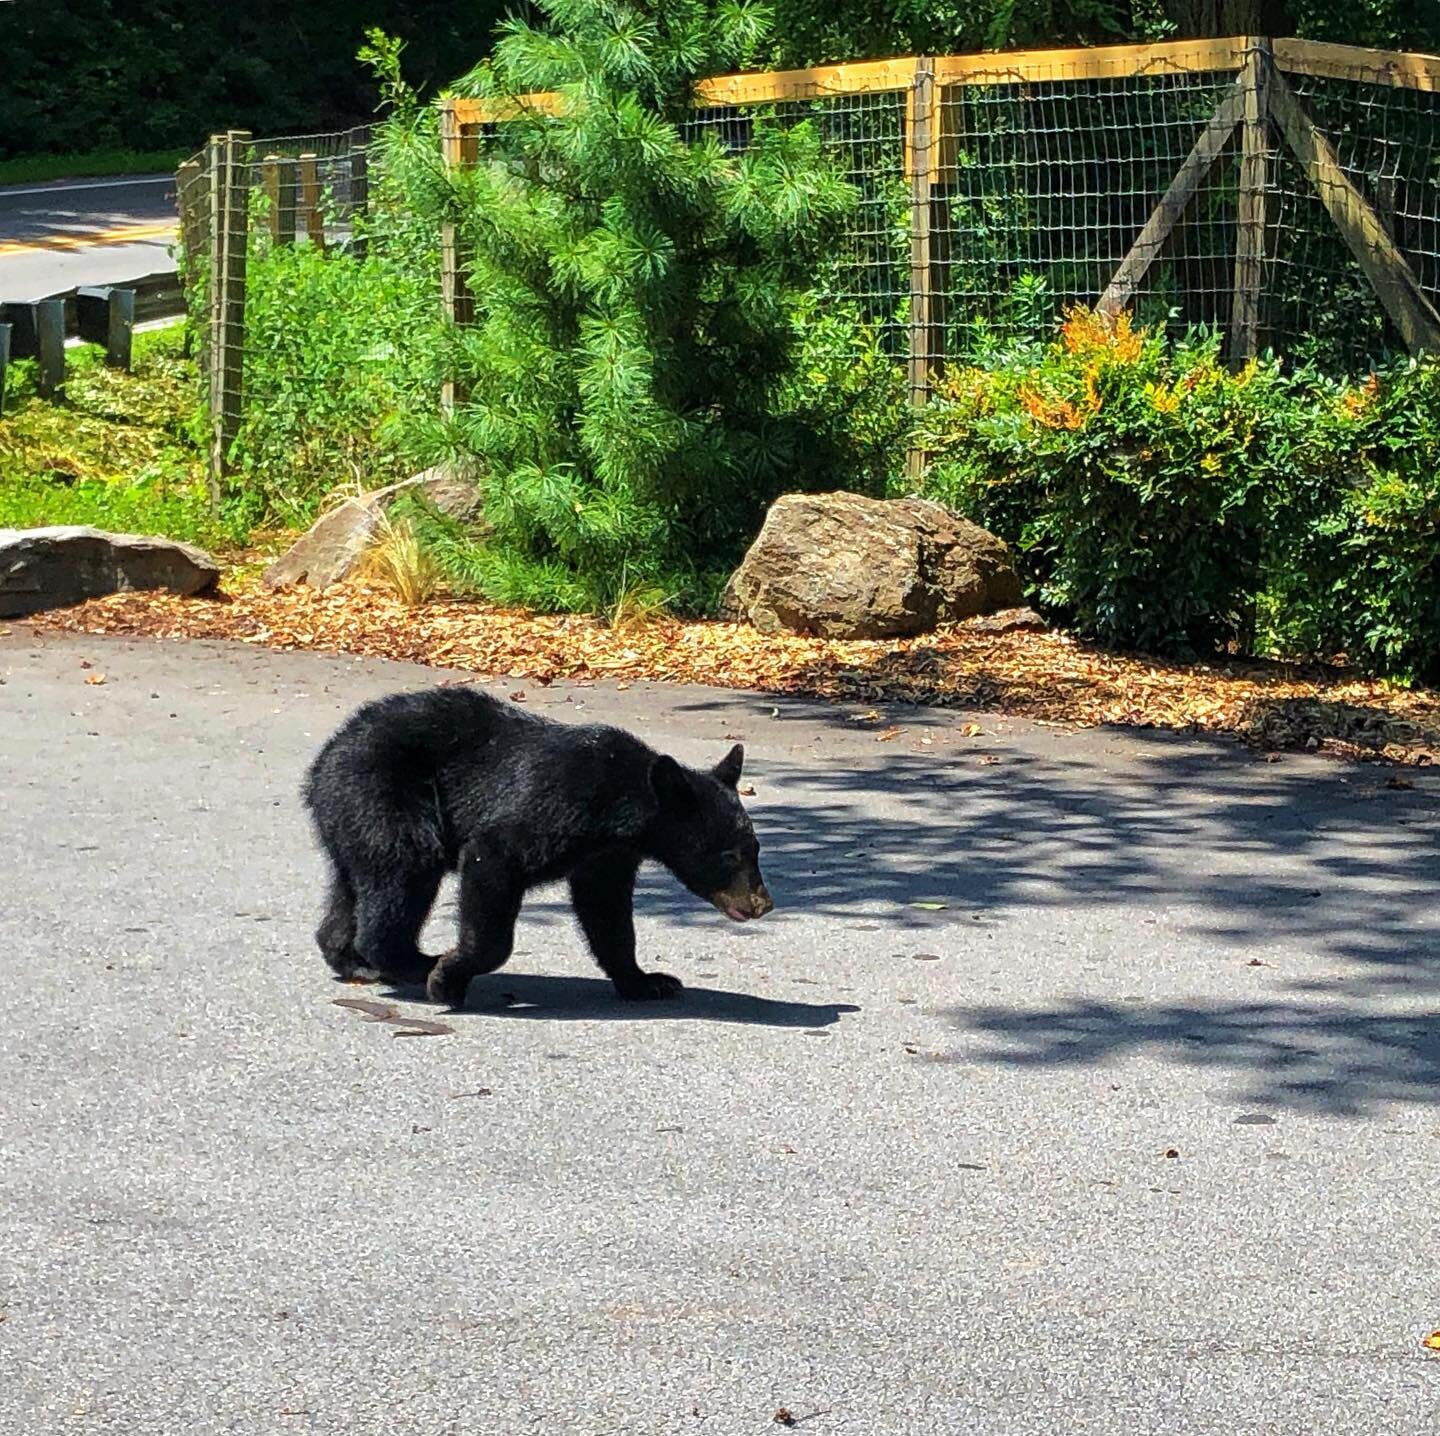 Just another day in #asheville up at #sunsetmountainretreat .
.
.
#bears